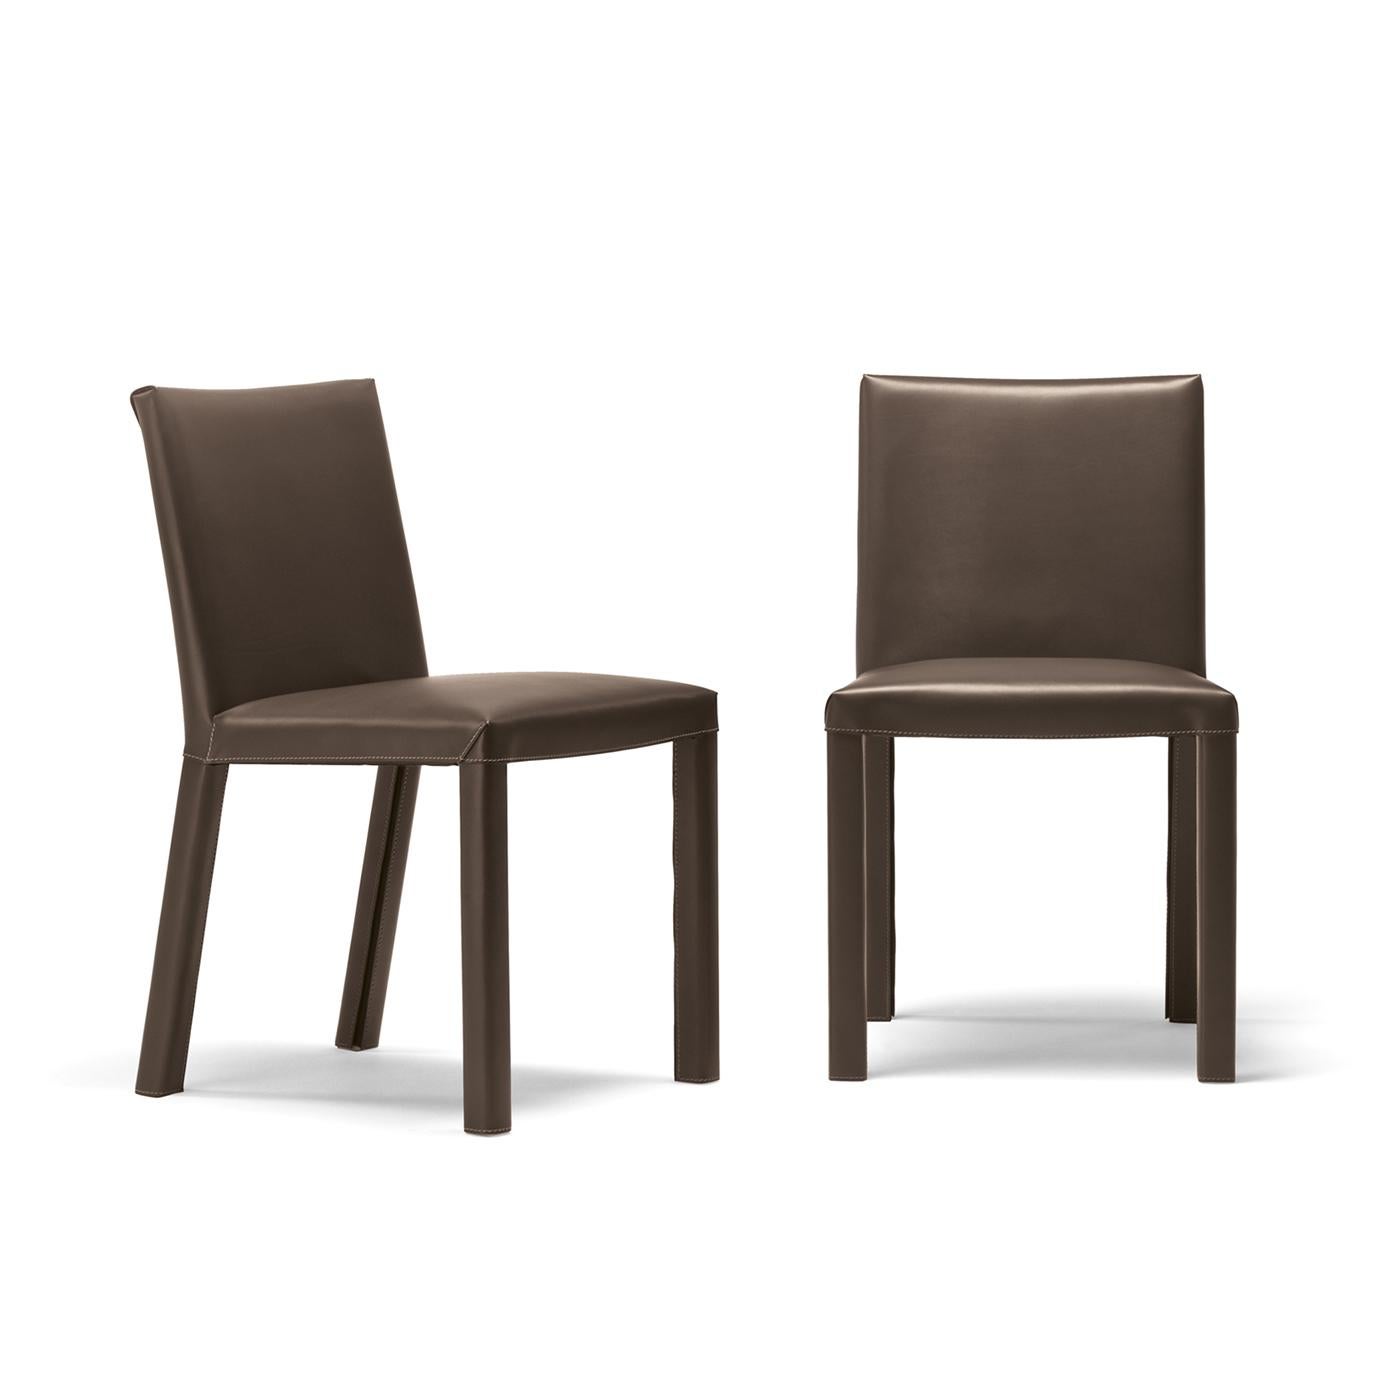 This padded chair is both prestigious and comfortable. Its terra-colored leather covering and simple, fluid lines make it fit into either a residential or business environment. The style also features a steel frame and and polyurethane padding. A